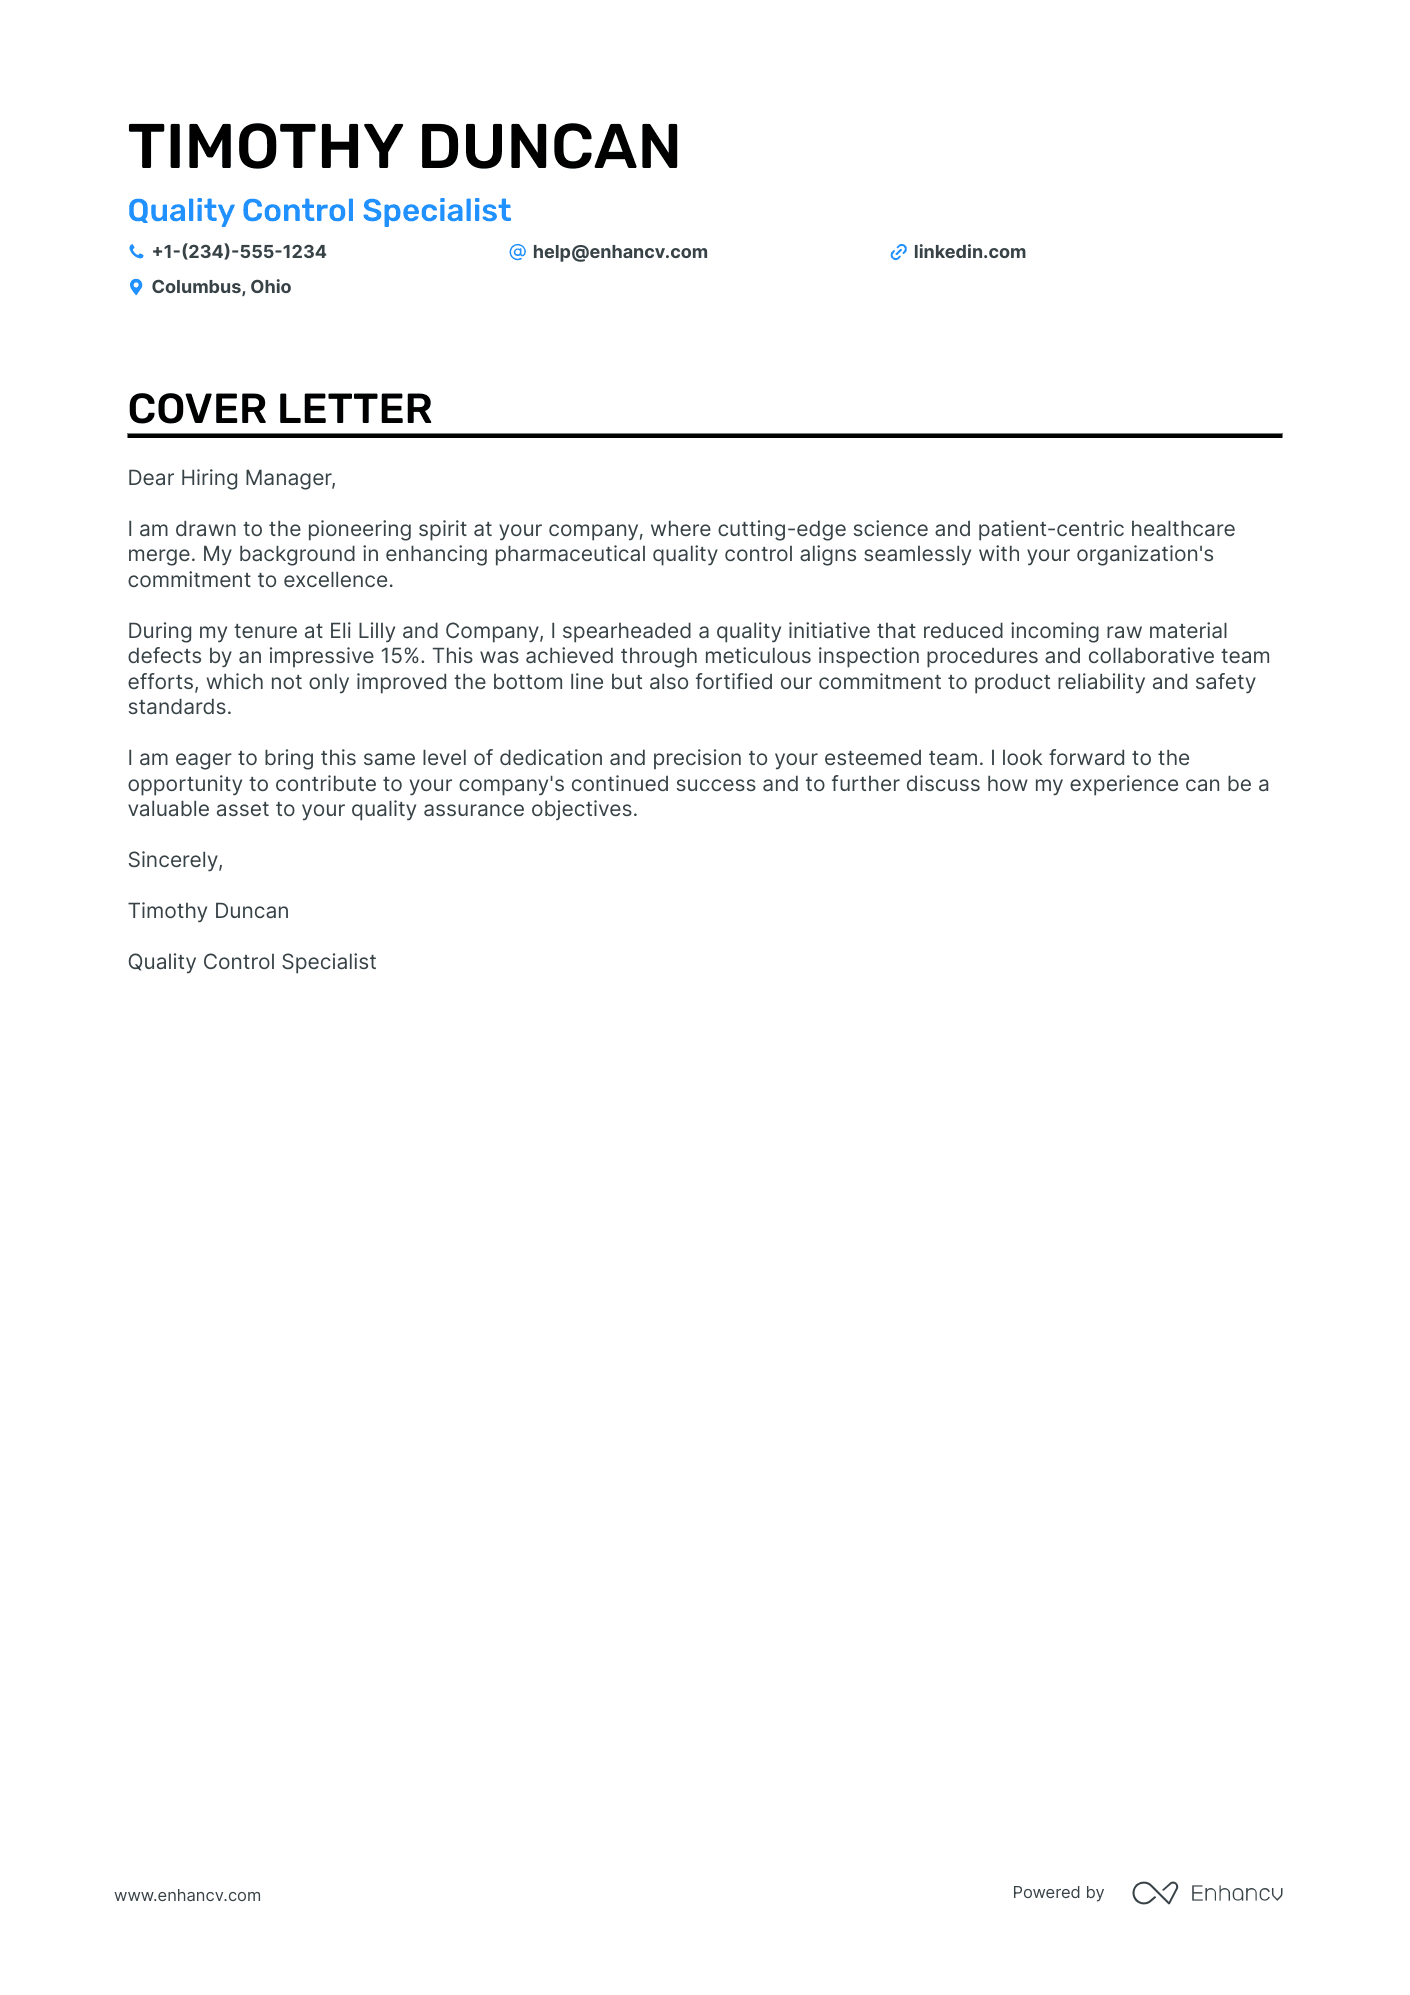 Quality Control Chemist cover letter